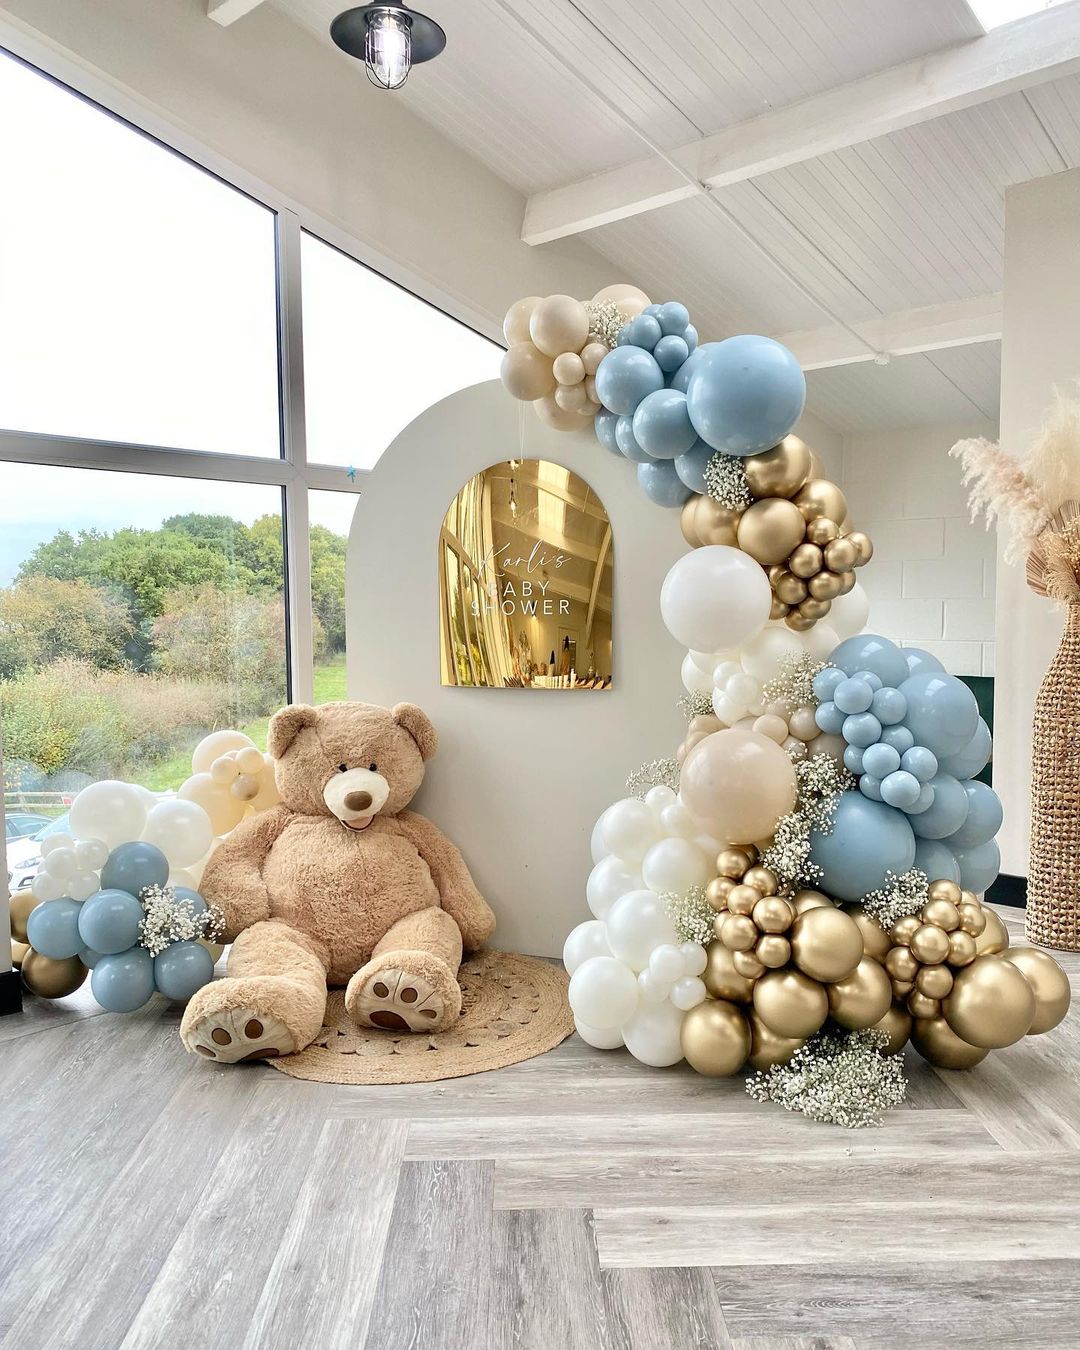 A large teddy bear and balloons are pictured in a baby shower venue. Photo by Instagram user @lunamoonballoons.